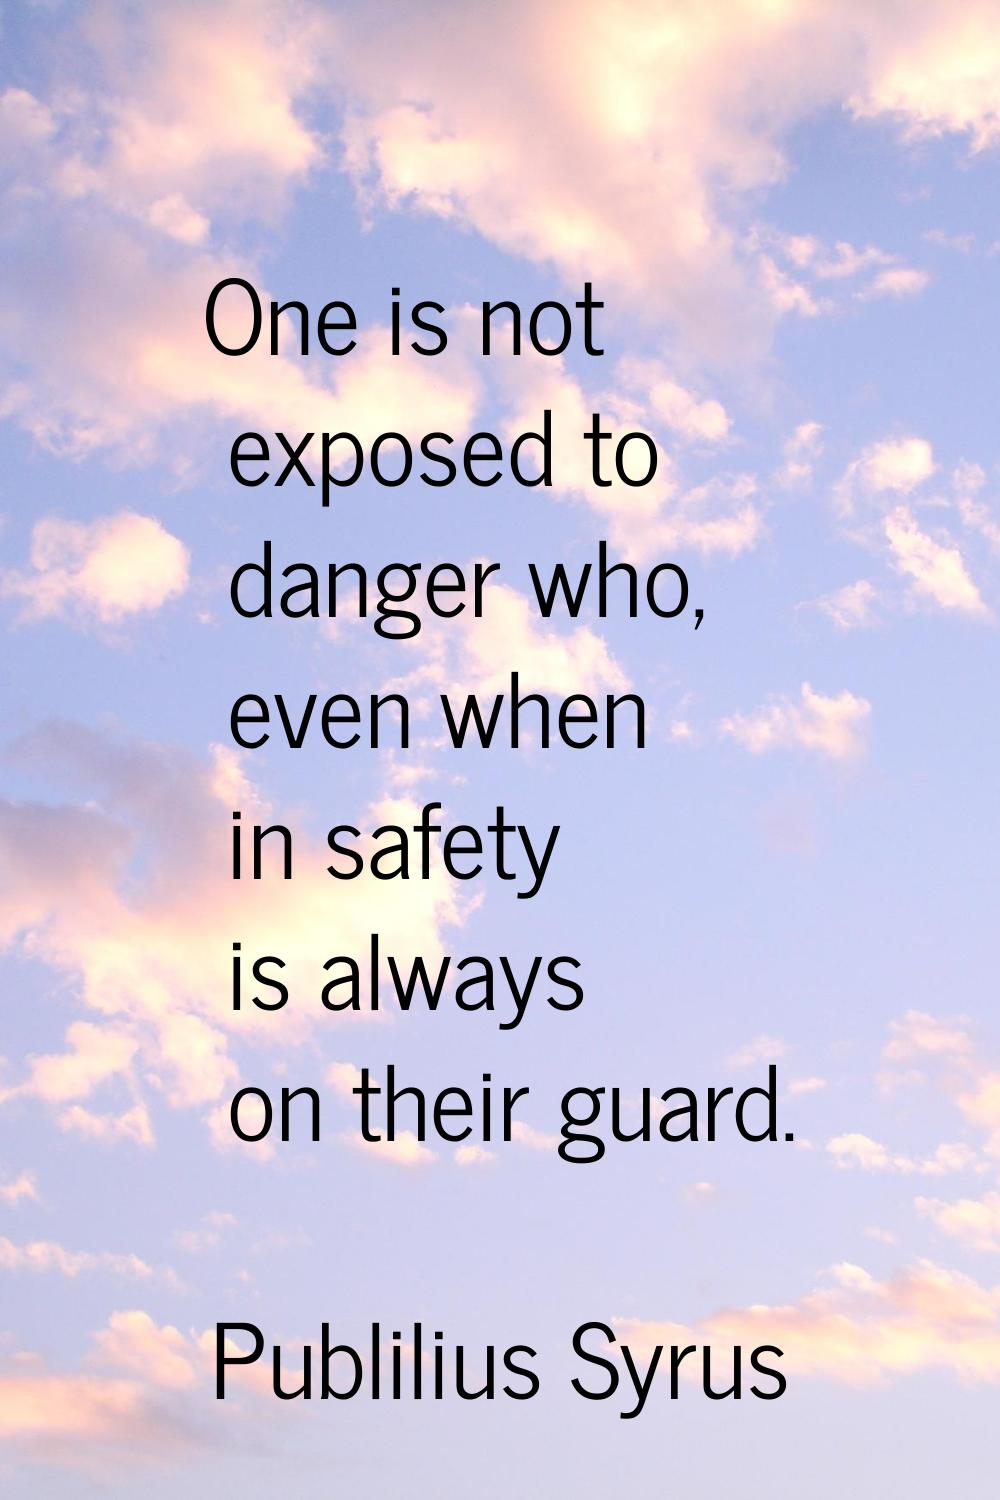 One is not exposed to danger who, even when in safety is always on their guard.